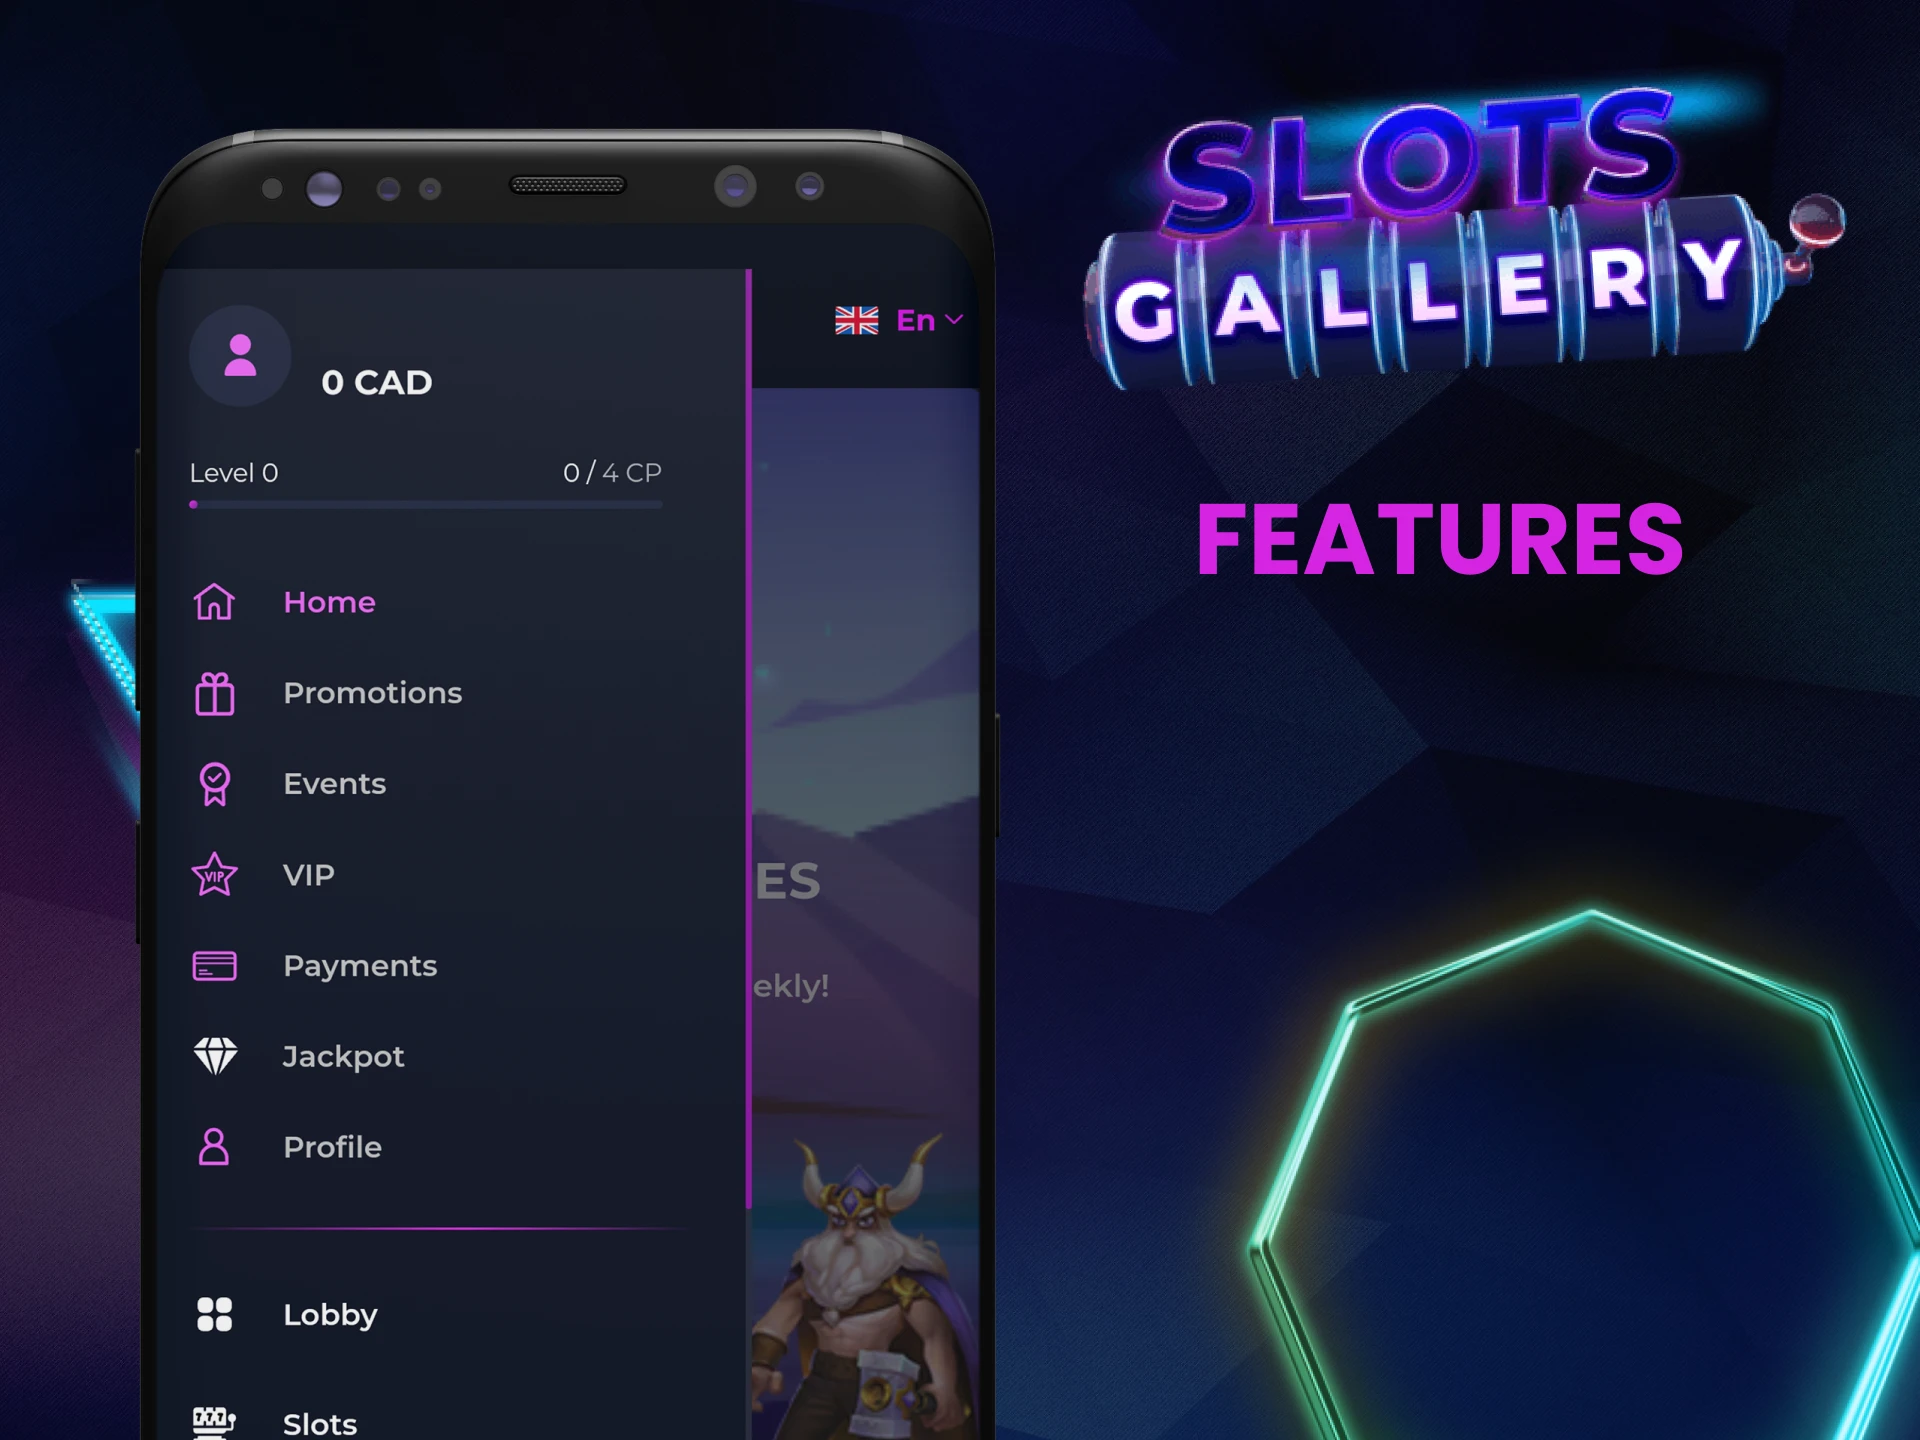 Find out about the features of the Slots Gallery application.